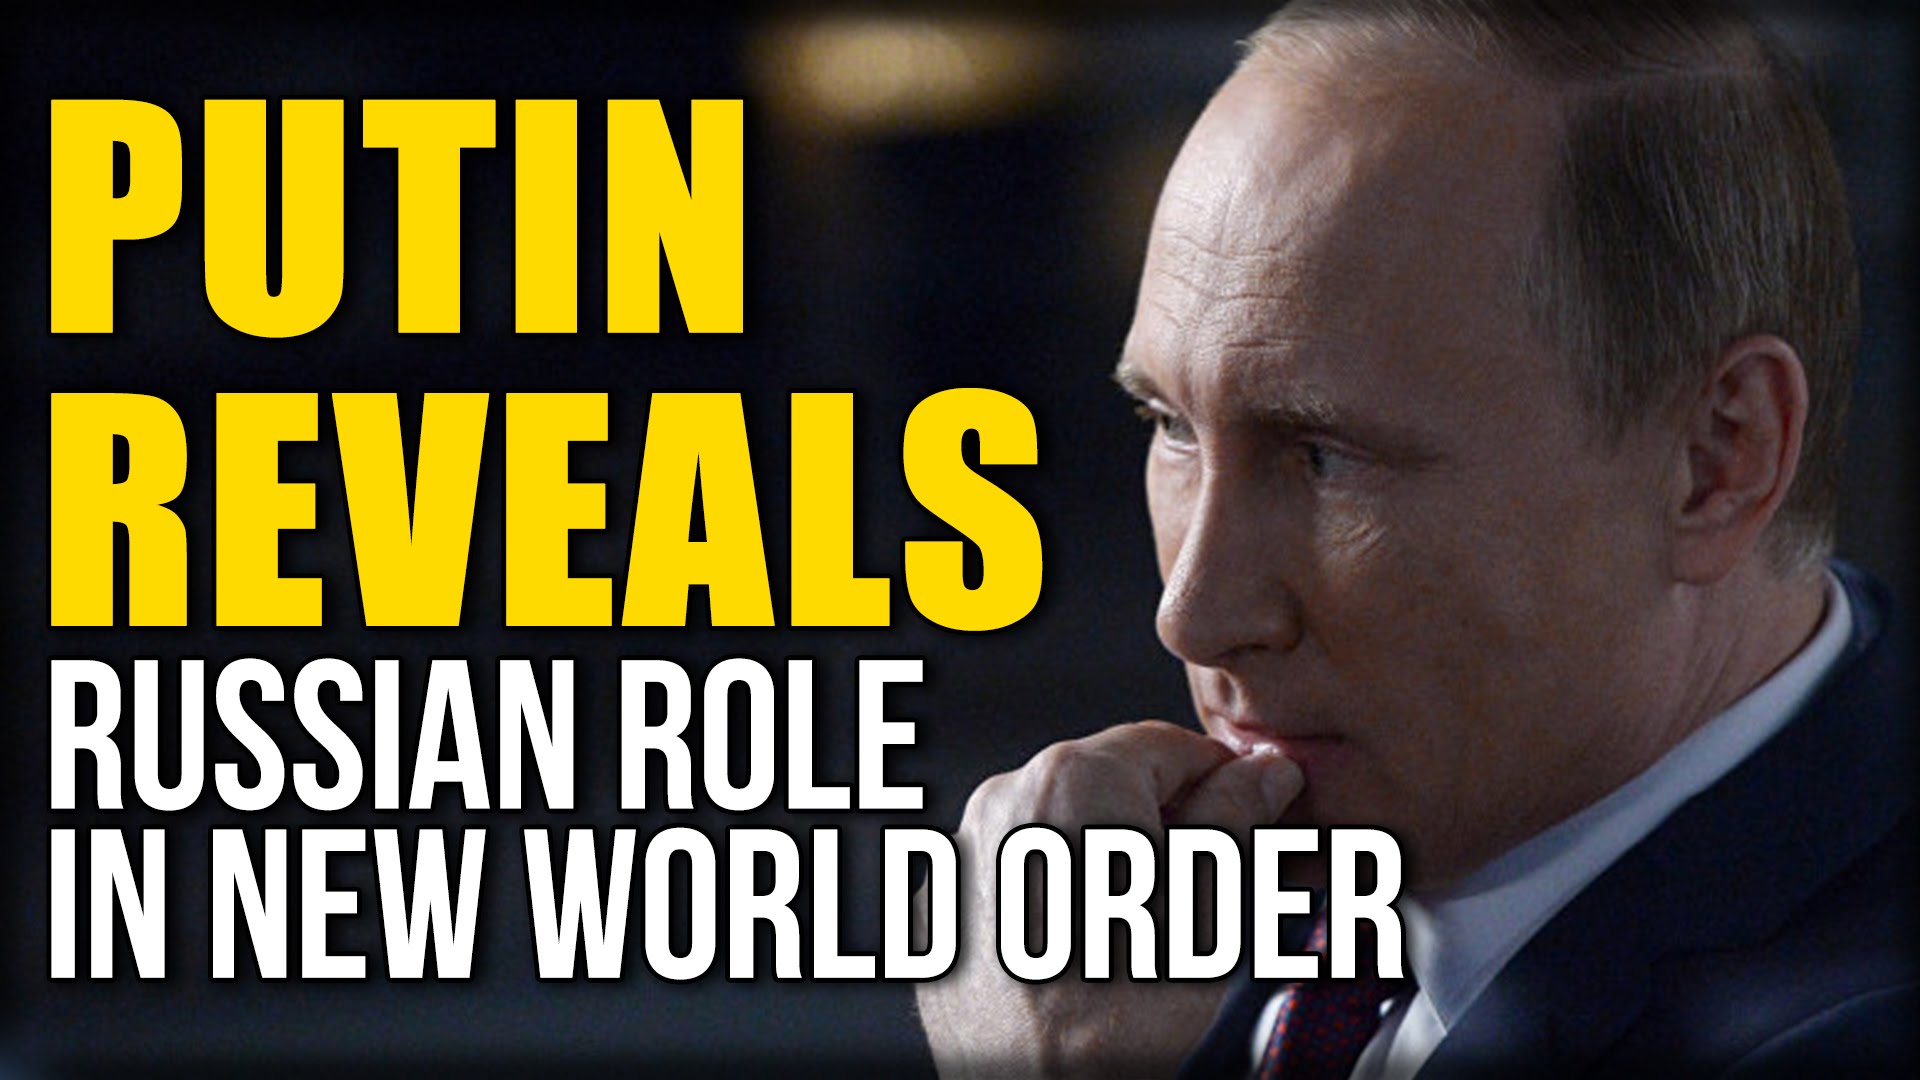 PUTIN REVEALS RUSSIAN ROLE IN NEW WORLD ORDER